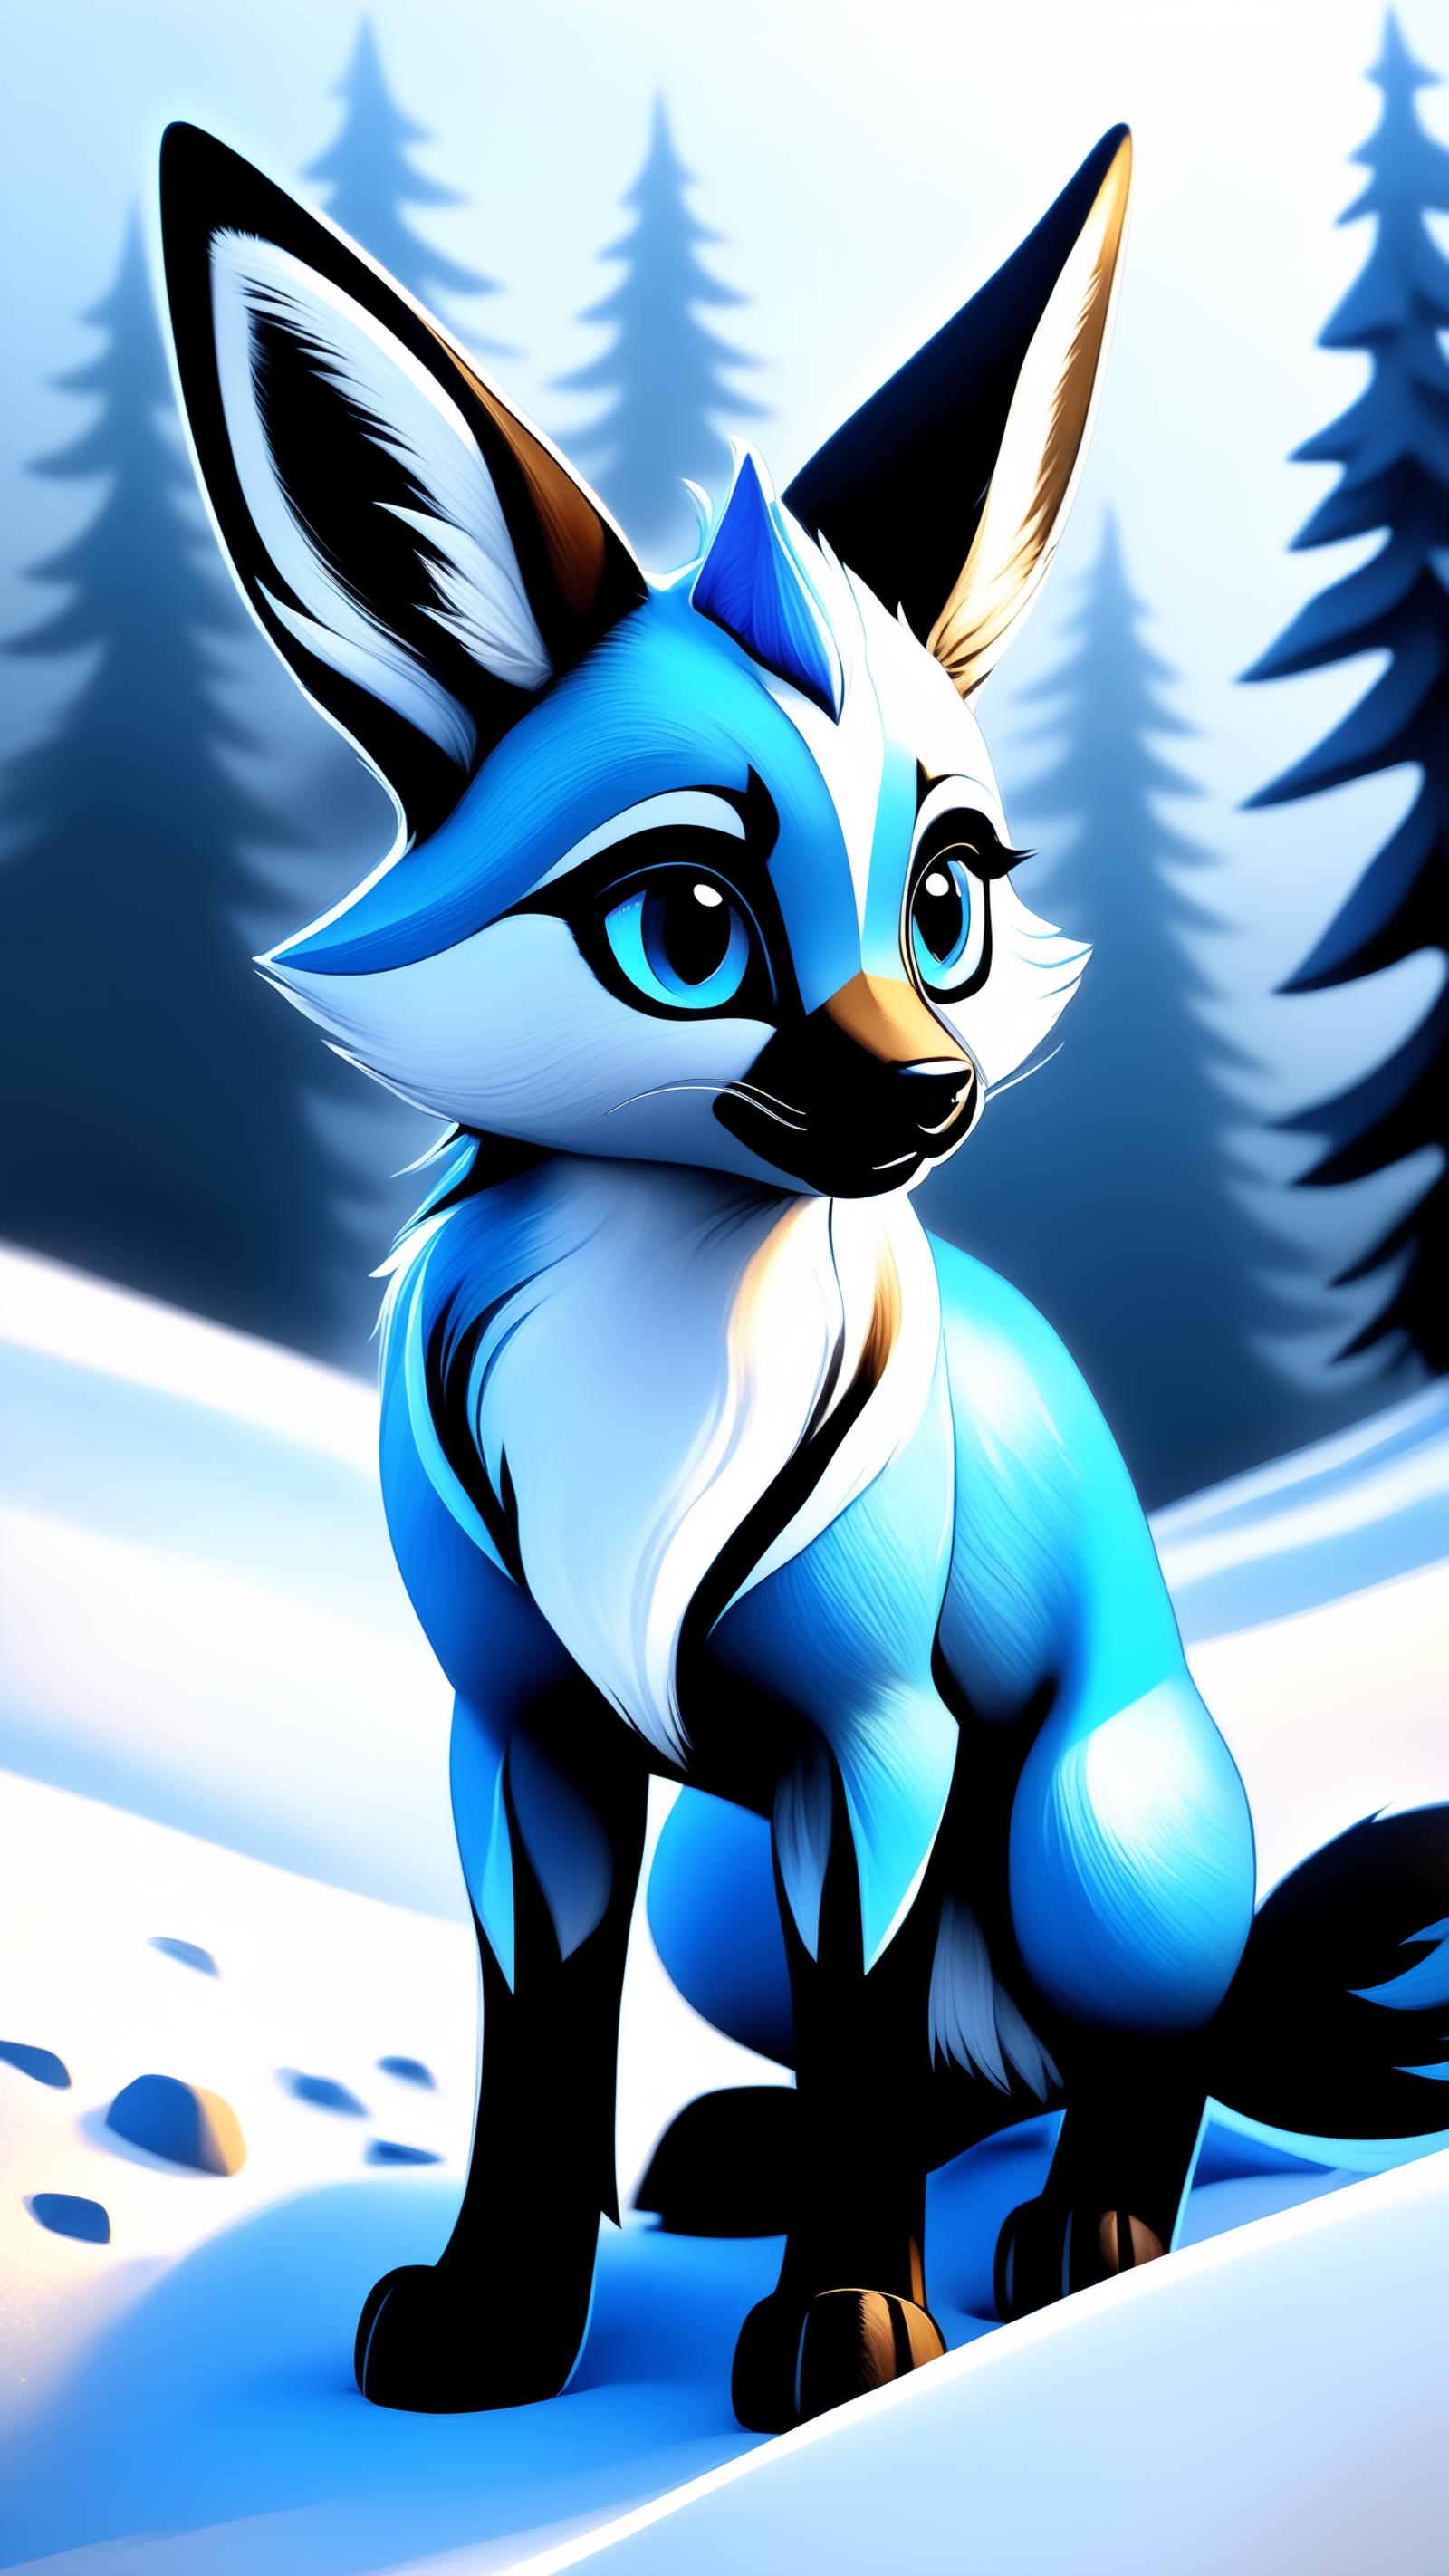 A blue and white furry animal, possibly a fox or cat, standing in the snow.